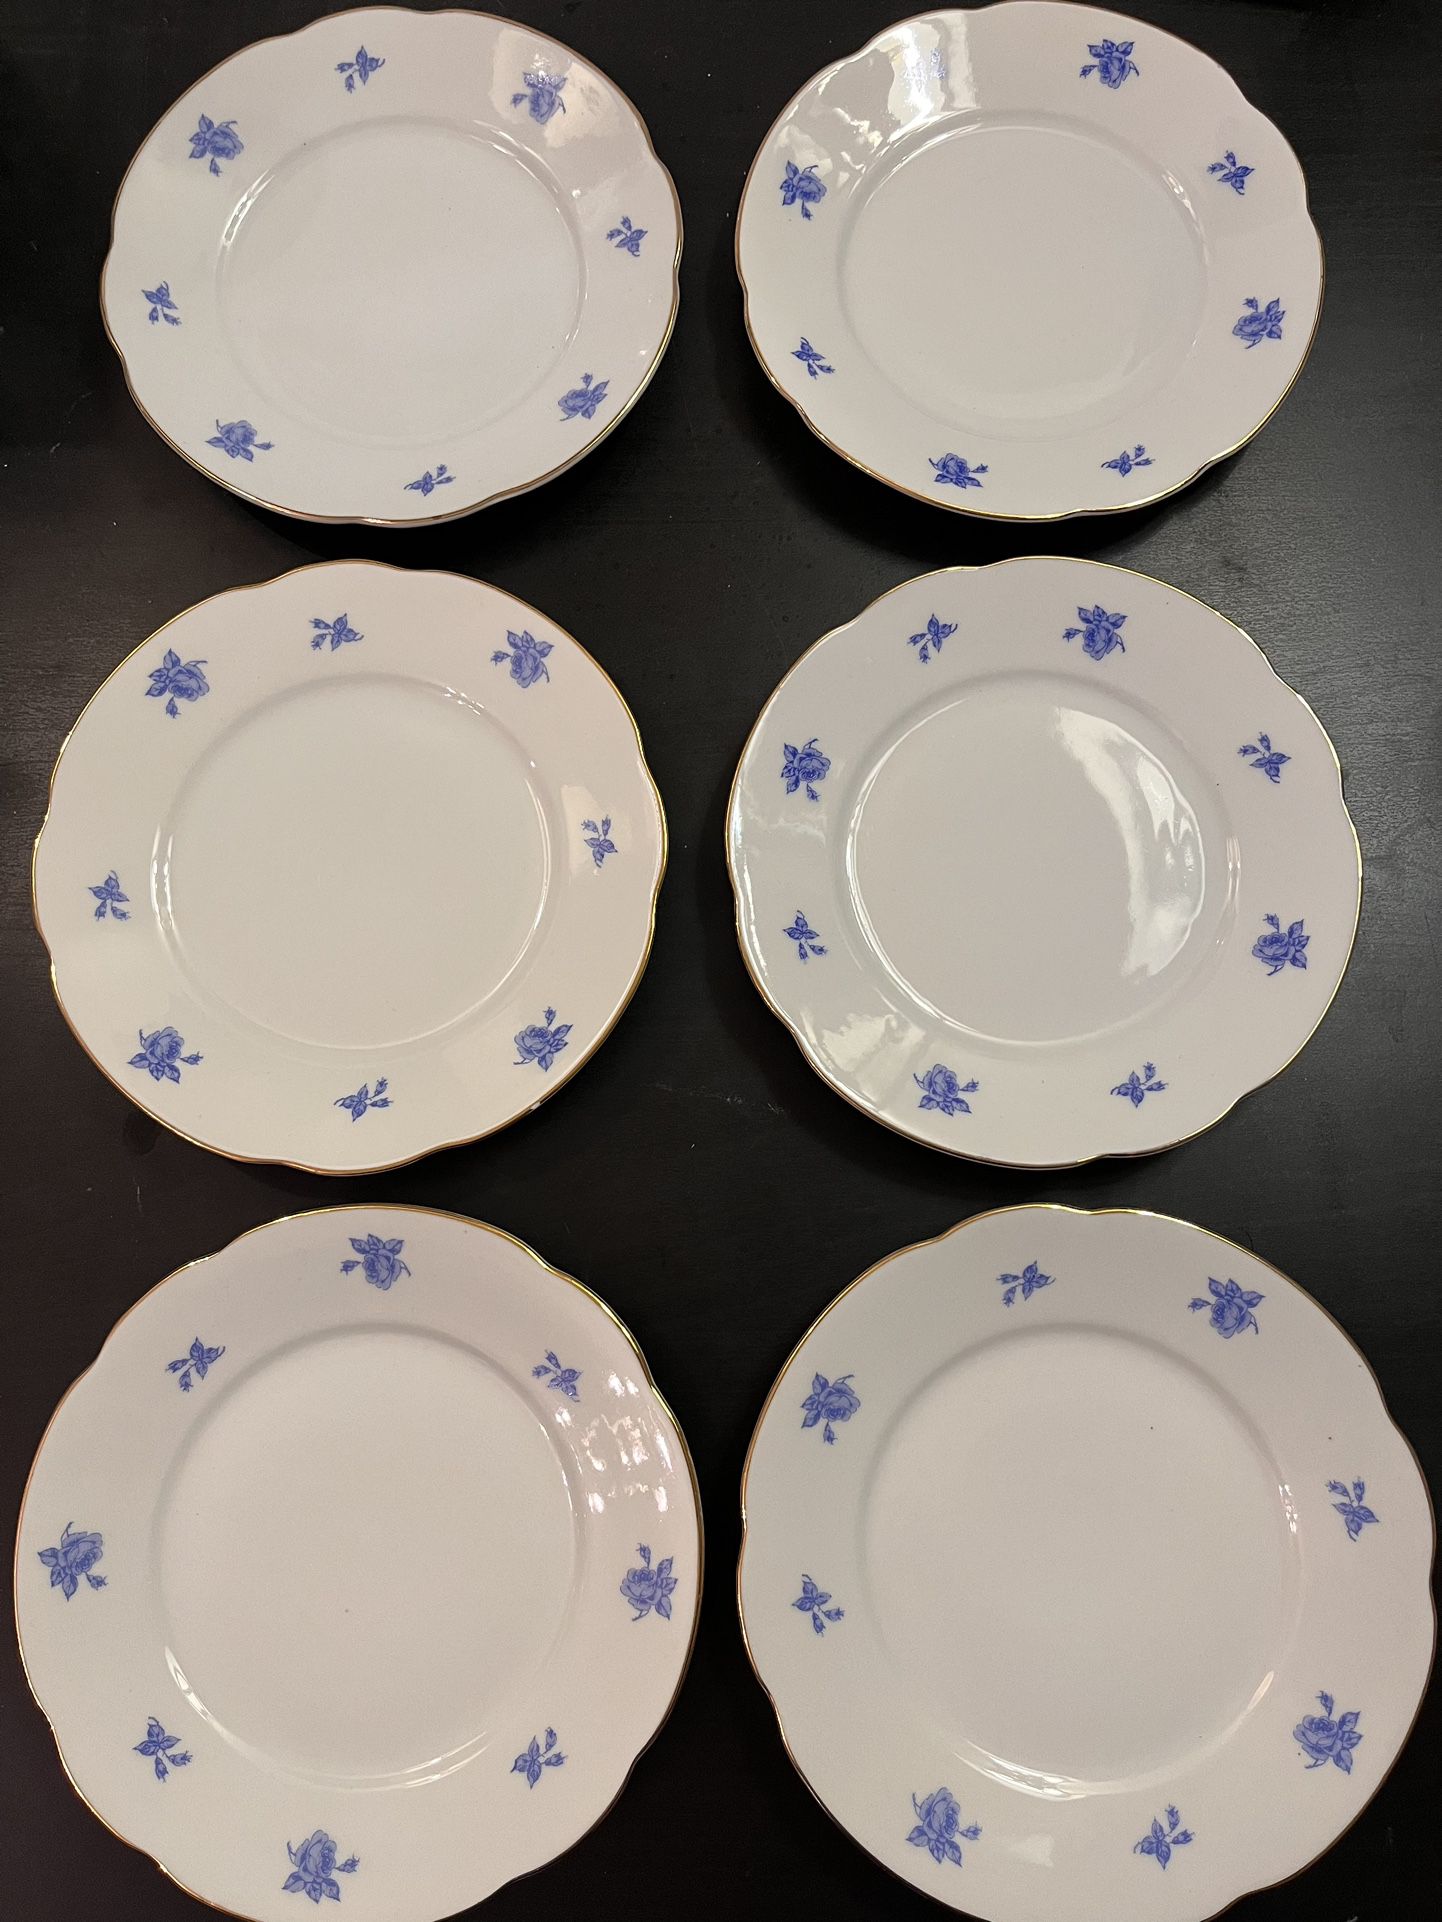 Set of 6 Arabia of Finland White Cake Plate with Blue Roses Decor Porcelain Tableware 1930 s 1950 s